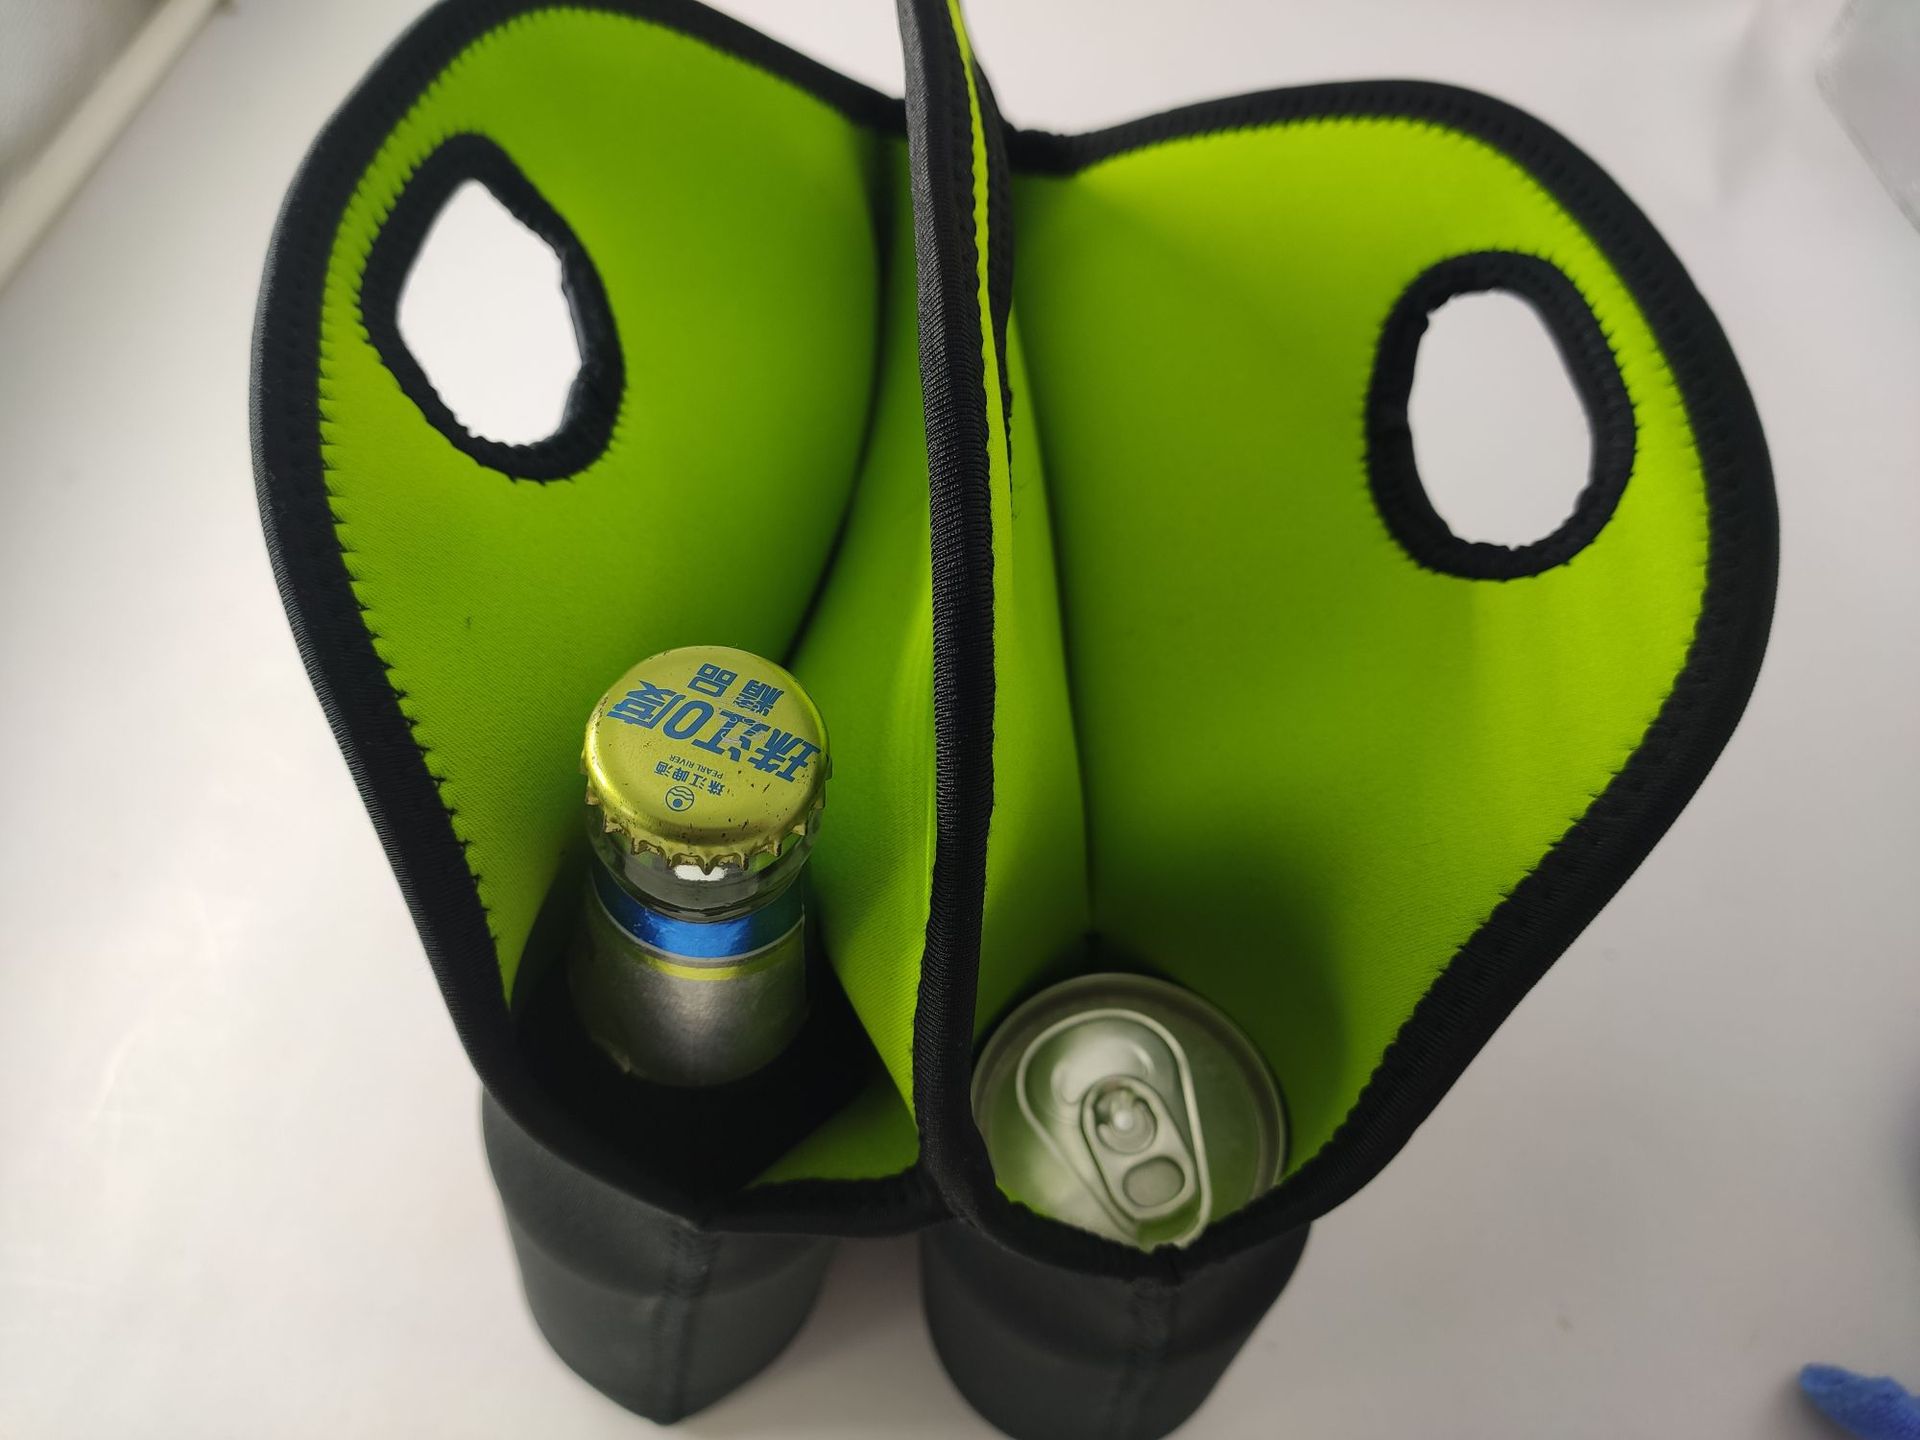 Beer Bottle Carrier With Opener, Thick Neoprene Bag. Keeps Cold And  Protected, Can Cooler Bag Customized Insulated 6 Pack 600pcs - Buy Beer  Bottle Carrier With Opener, Thick Neoprene Bag. Keeps Cold